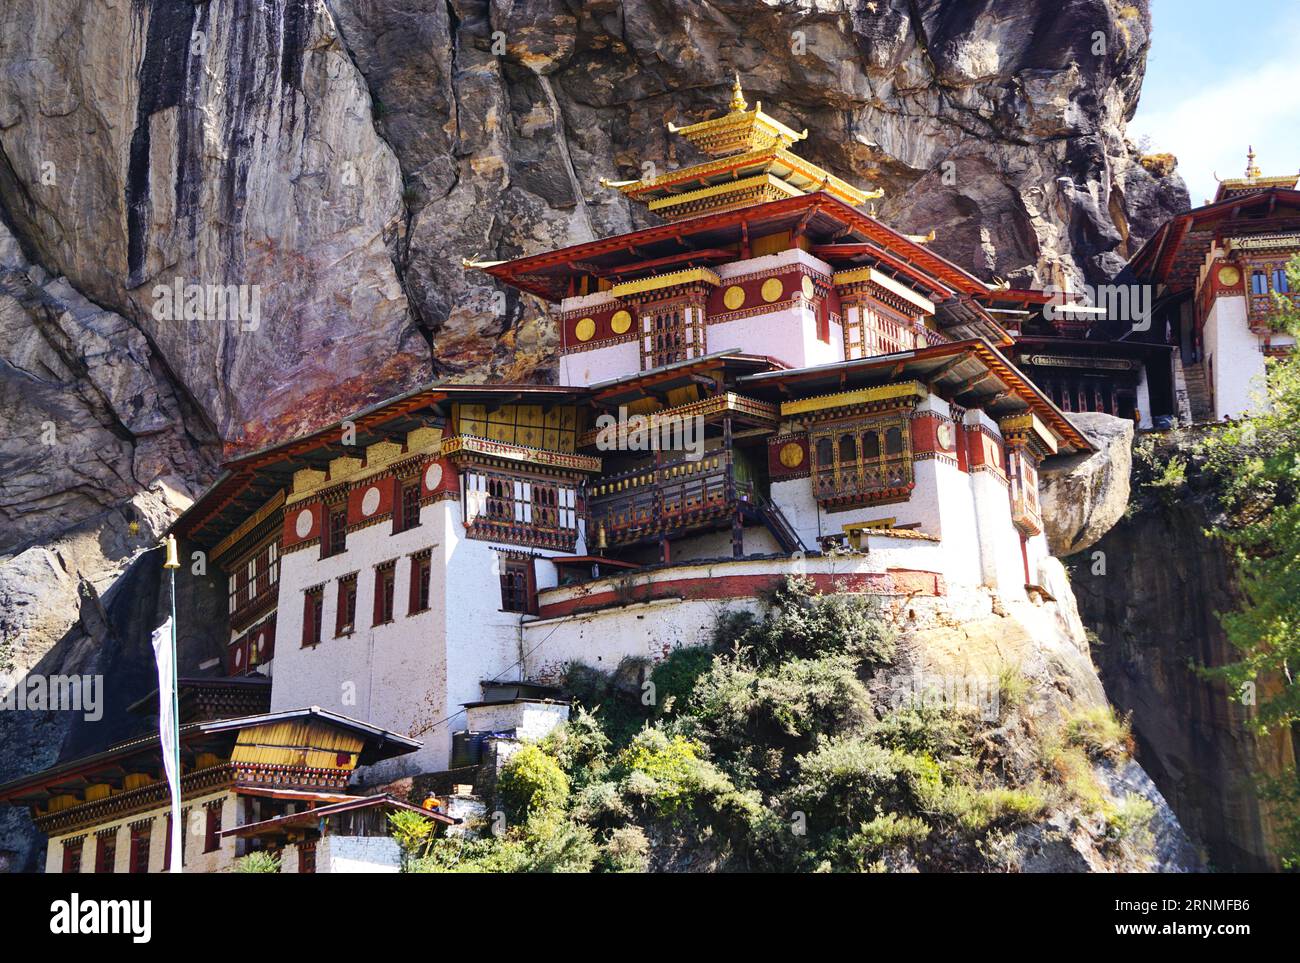 Closeup of the main structure at Bhutan's famous Tiger's Nest Monastery (Taktsang), nestled among the sheer cliffs high above the Paro Valley Stock Photo